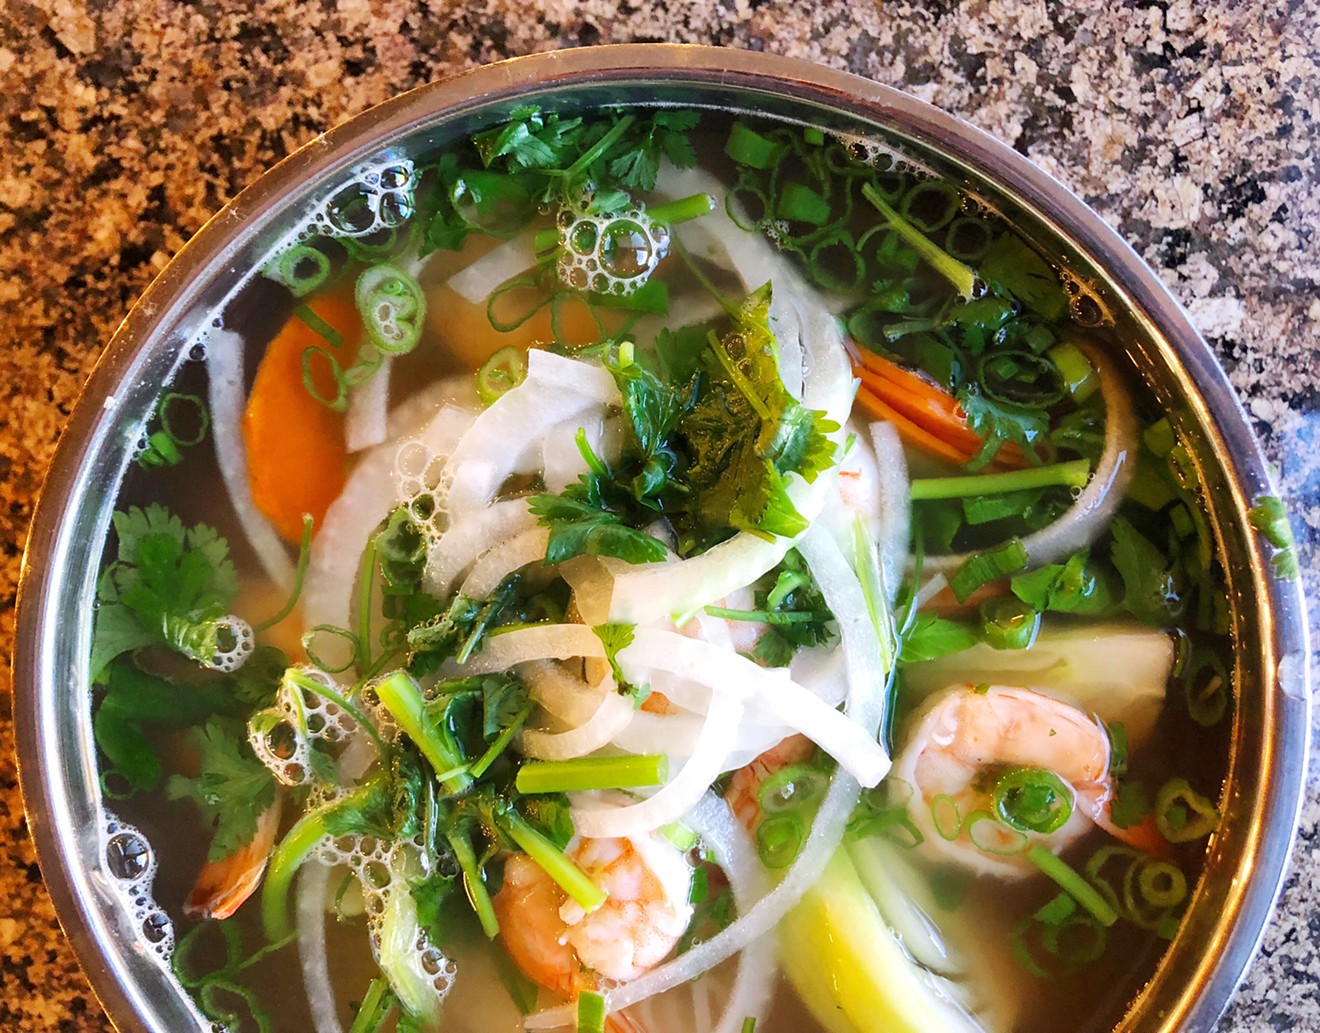 The shrimp pho is packed with carrots, bok choy, onions, and cilantro in a choice of beef or vegetable broth.